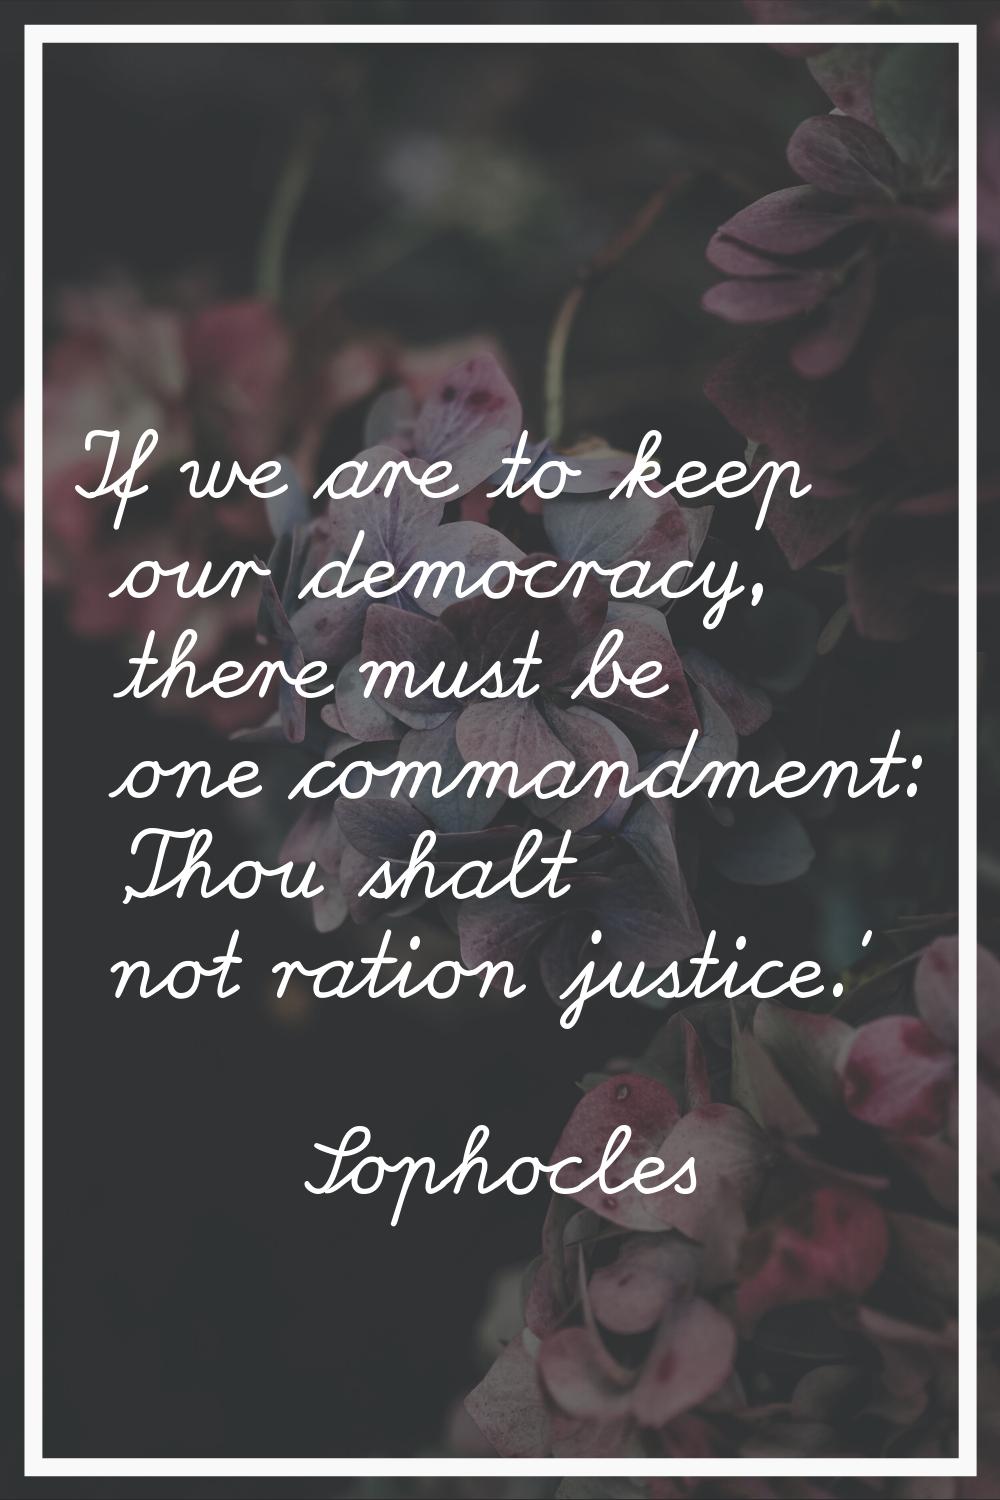 If we are to keep our democracy, there must be one commandment: 'Thou shalt not ration justice.'